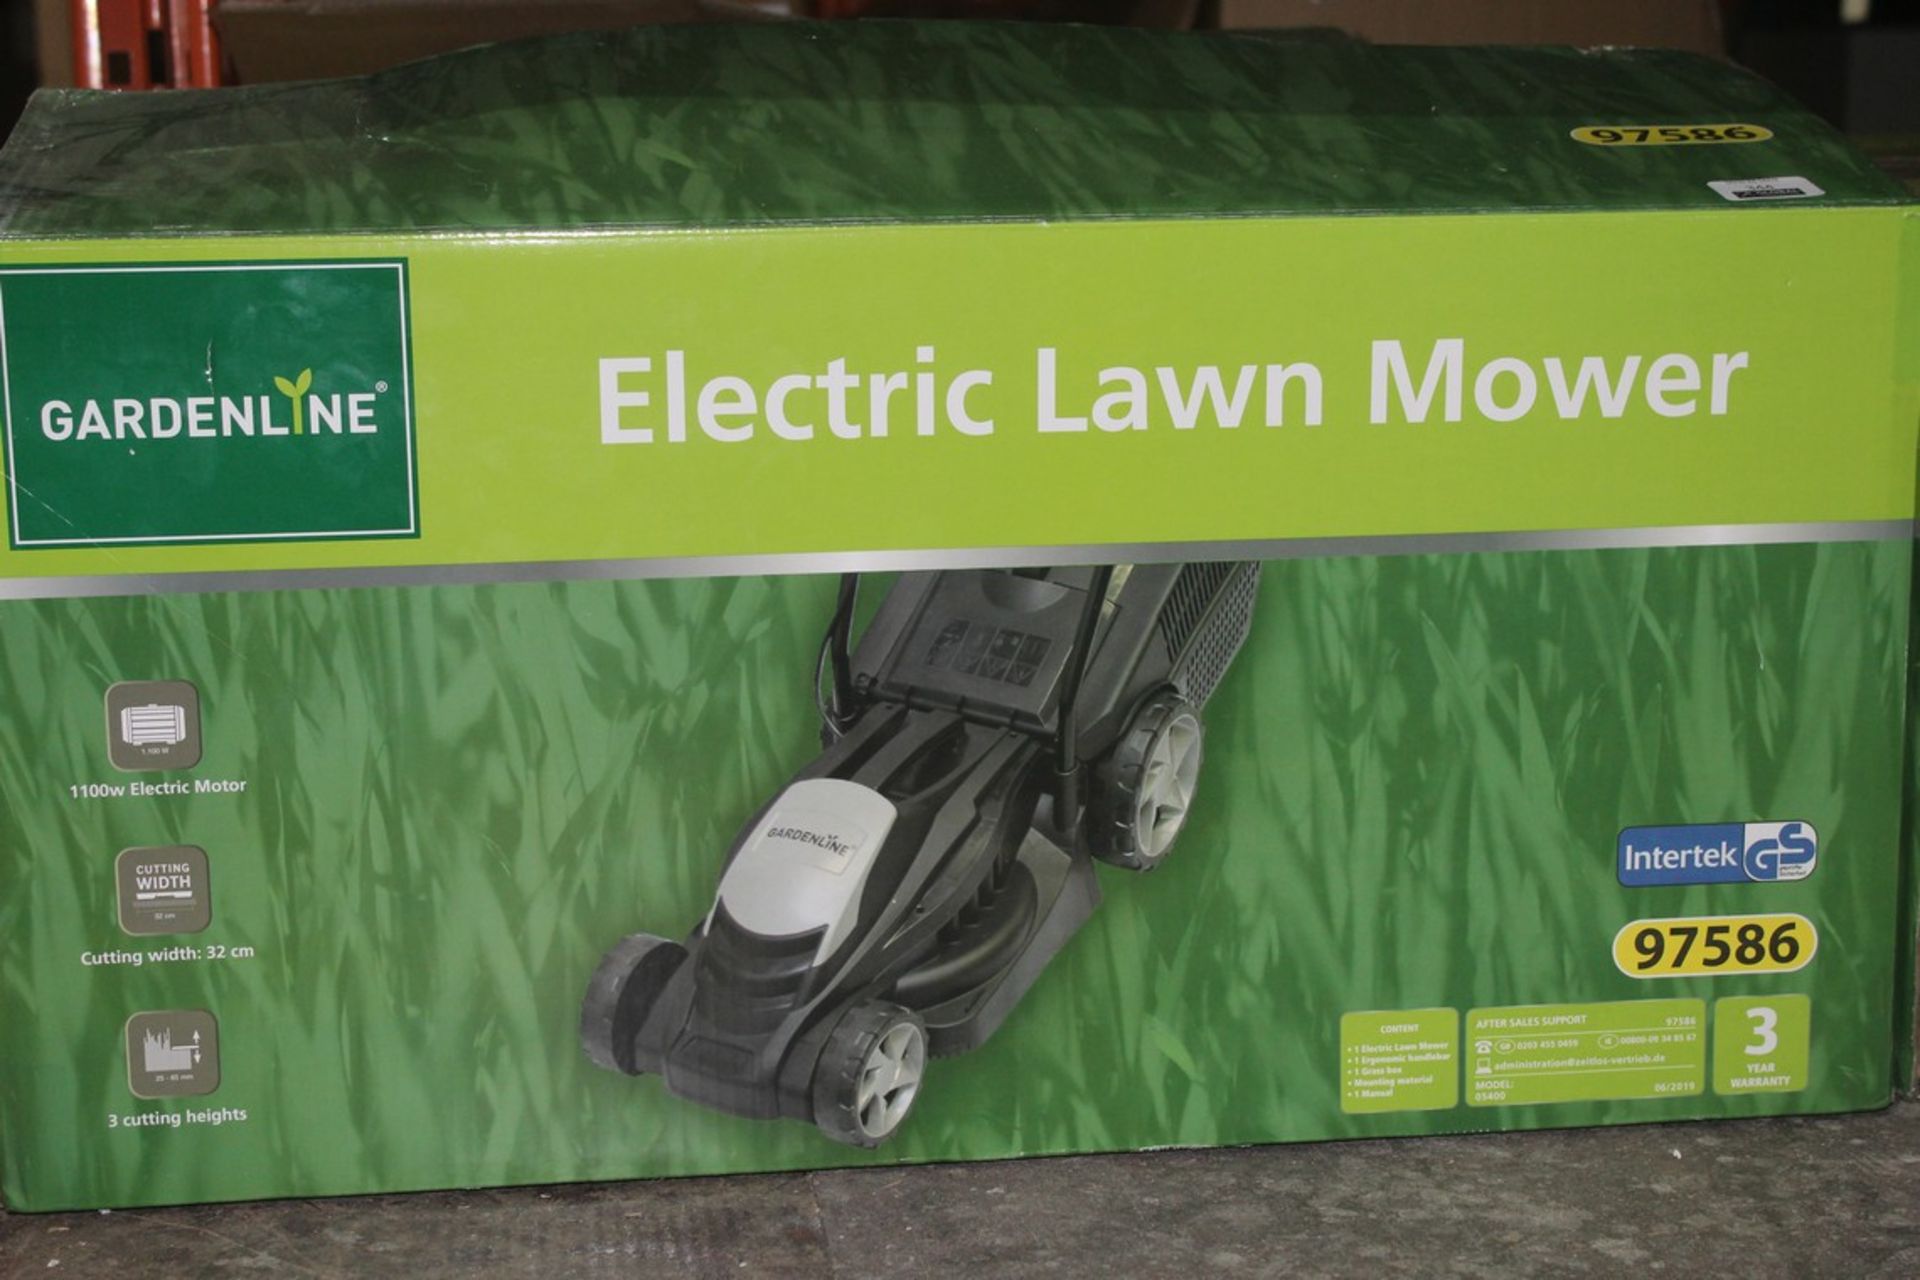 Boxed Gardenline Electric Lawn Mower RRP £40 (Public Viewing and Appraisals Available)